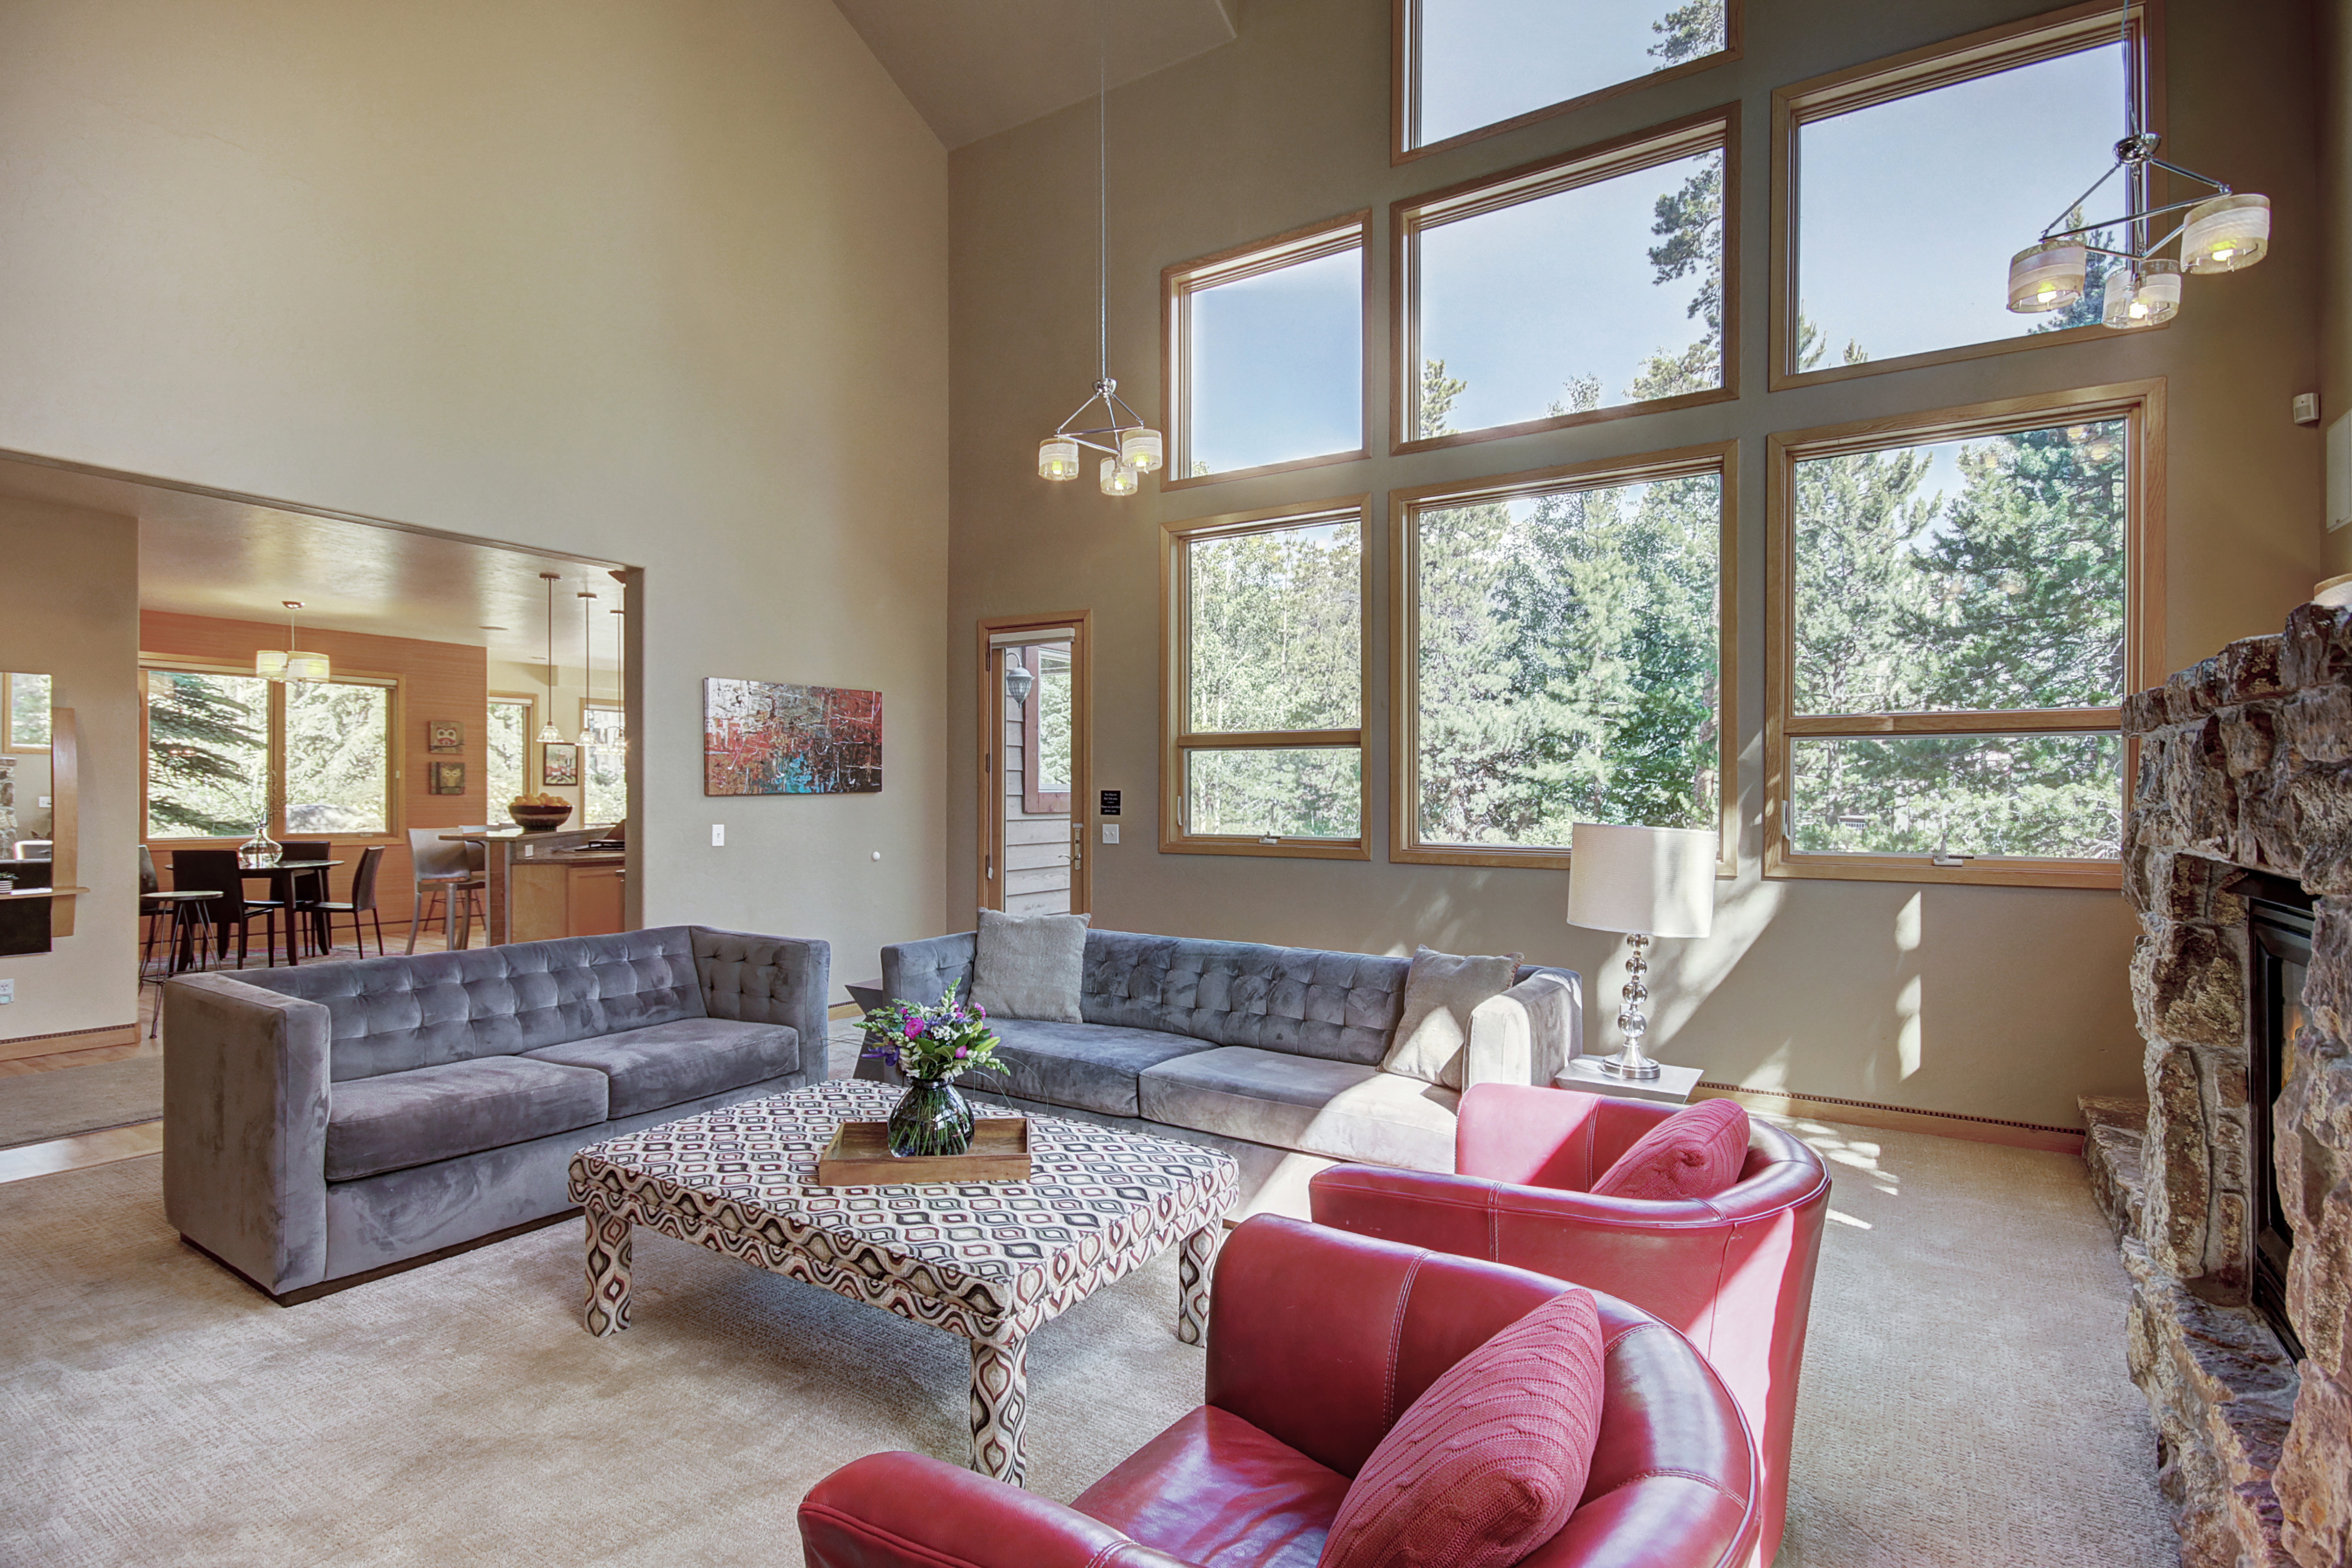 The large windows in the living room allow natural light to flow through. - Buffalo Mountain Vista Frisco Vacation Rental